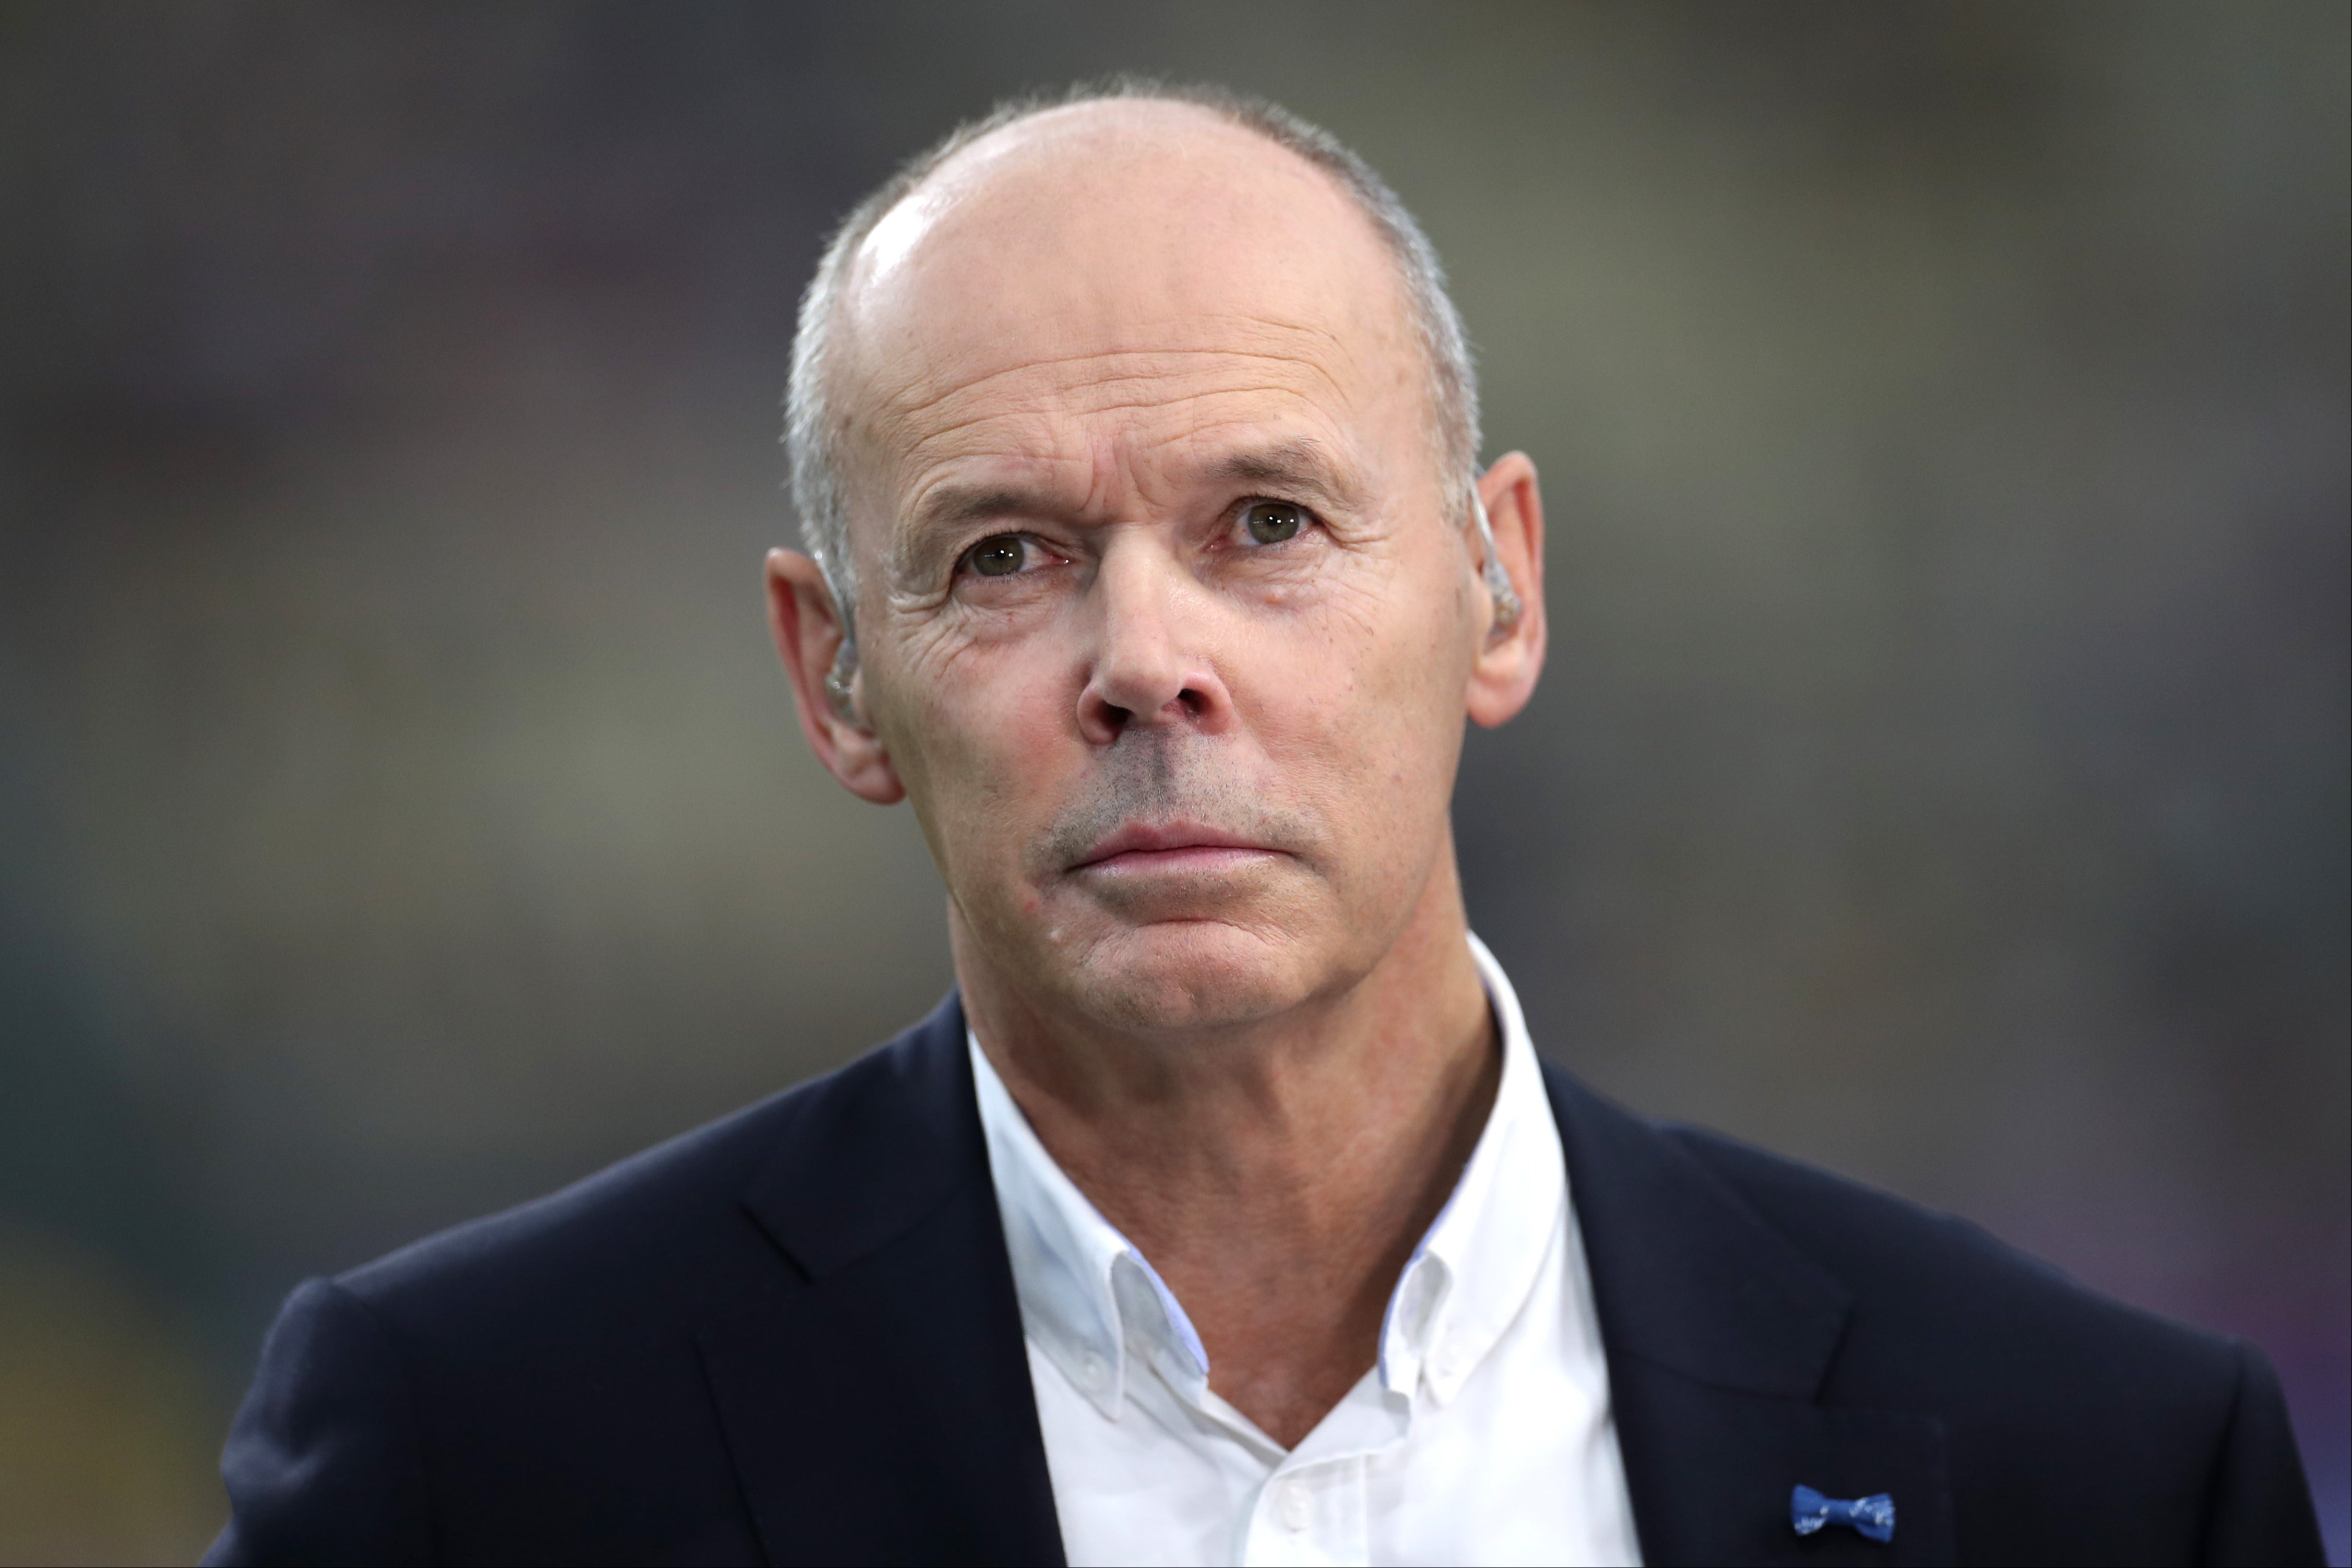 Clive Woodward coached England to victory at the 2003 Rugby World Cup